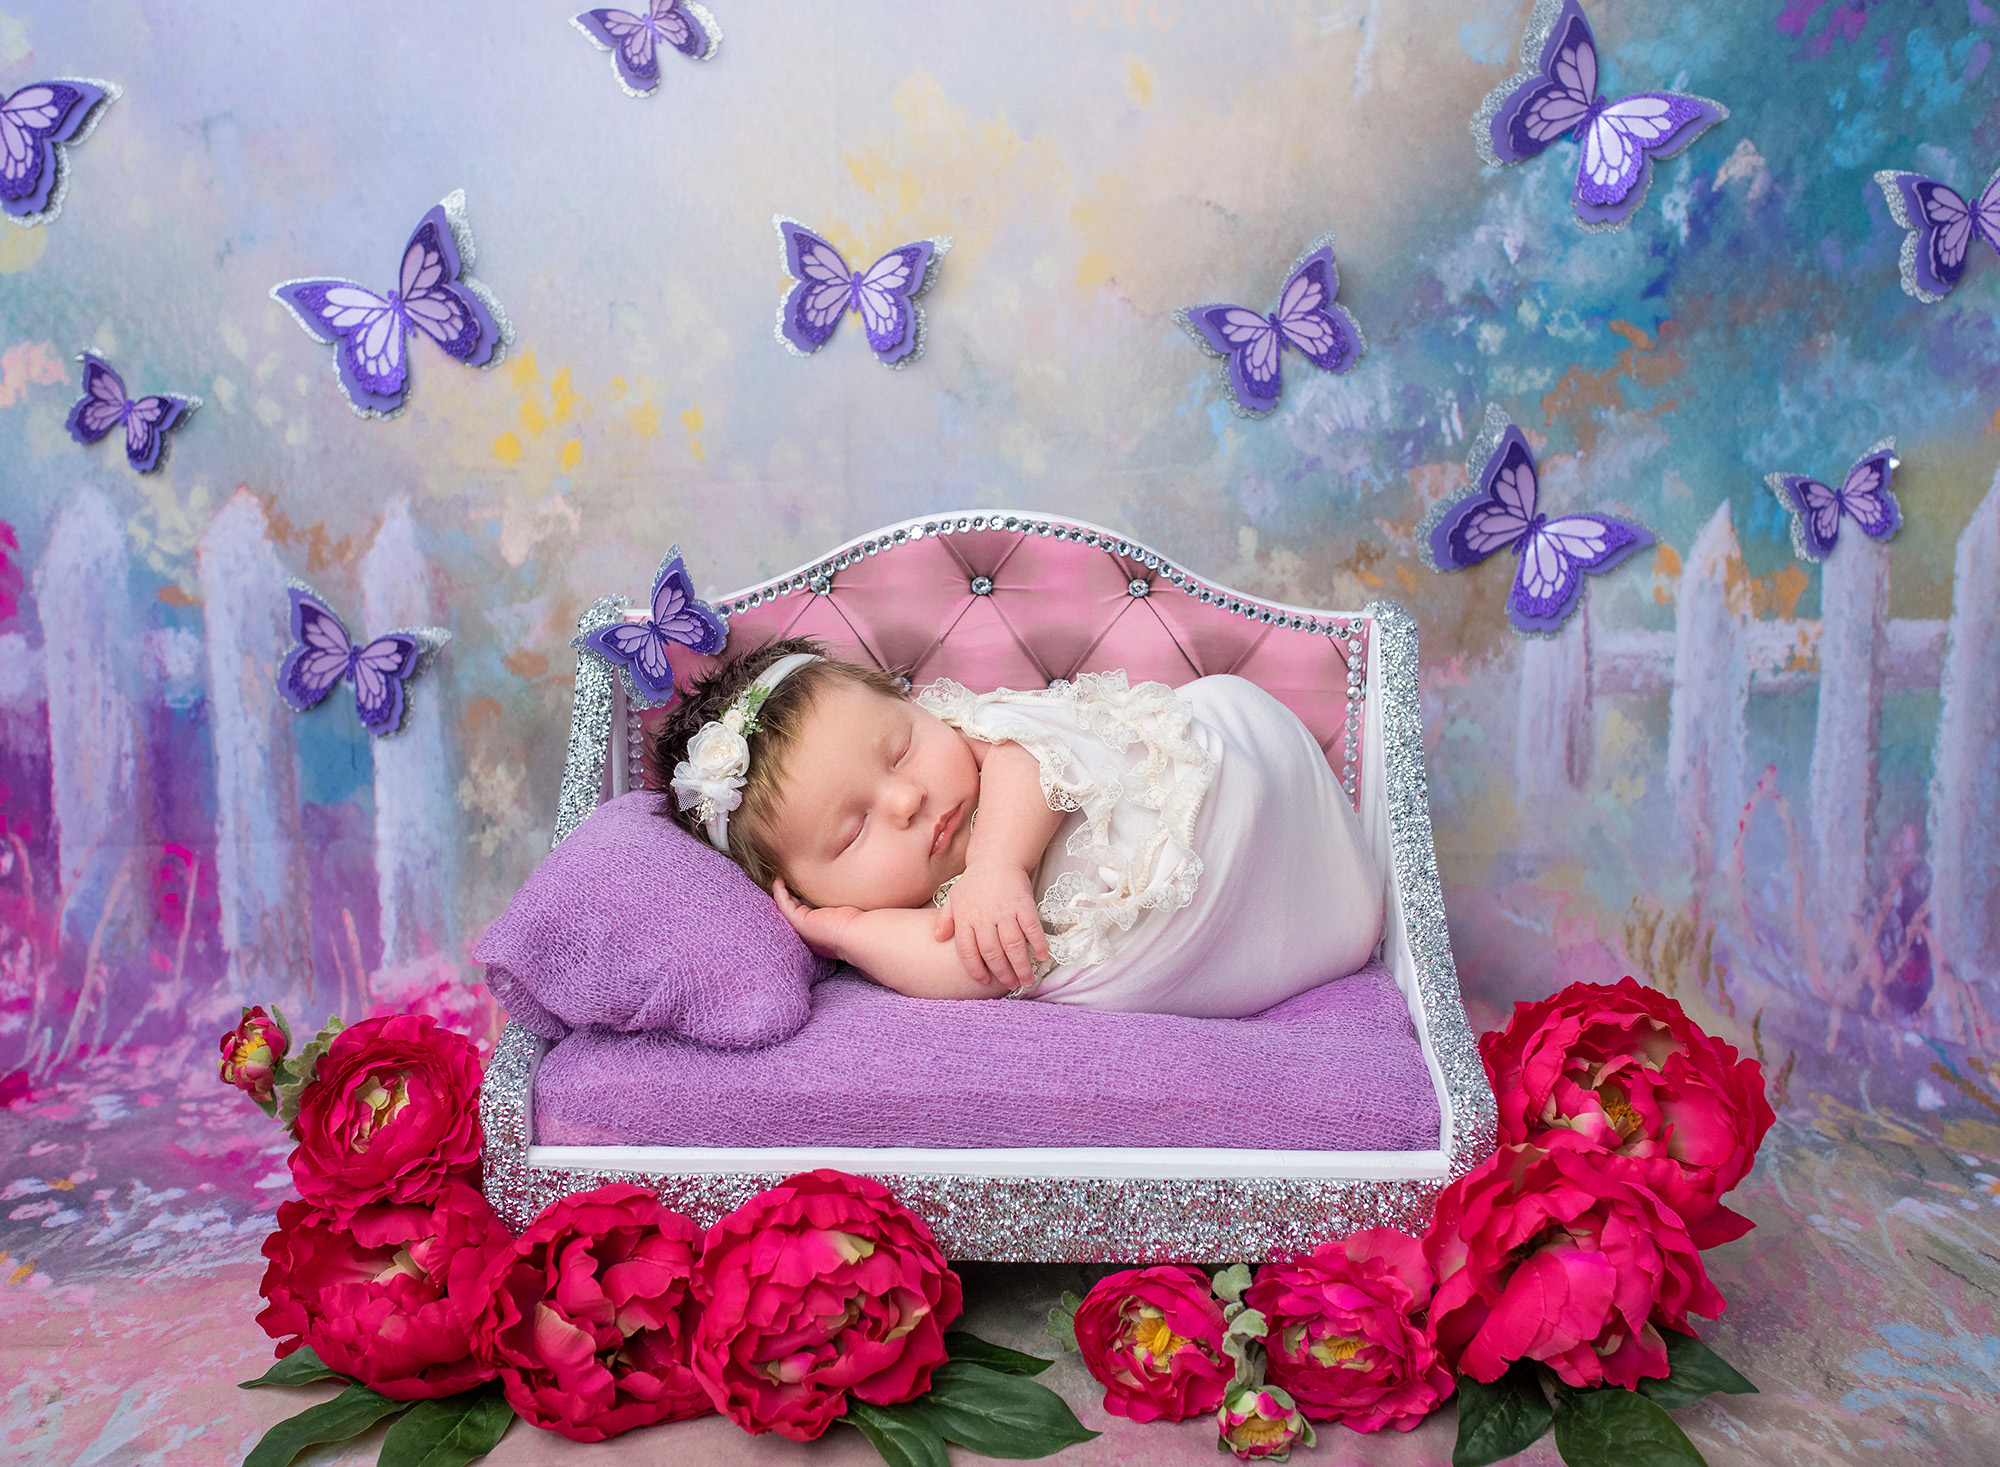 Newborn Photos with Butterflies newborn baby girl sound asleep on glittered miniature bed covered in purple surrounded by pink flowers and butterflies